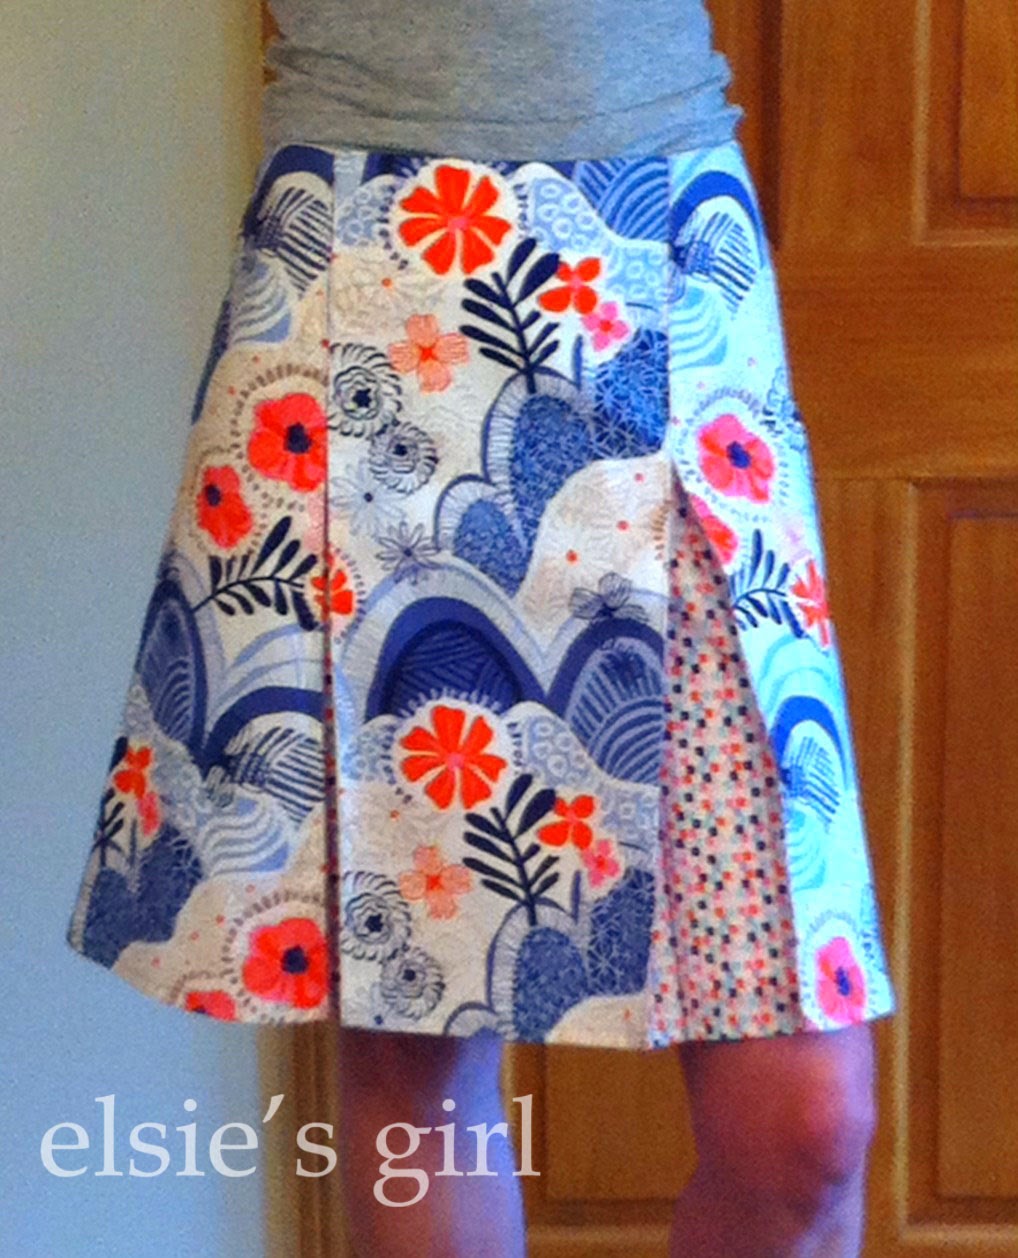 elsie's girl: building a summer wardrobe one skirt at a time